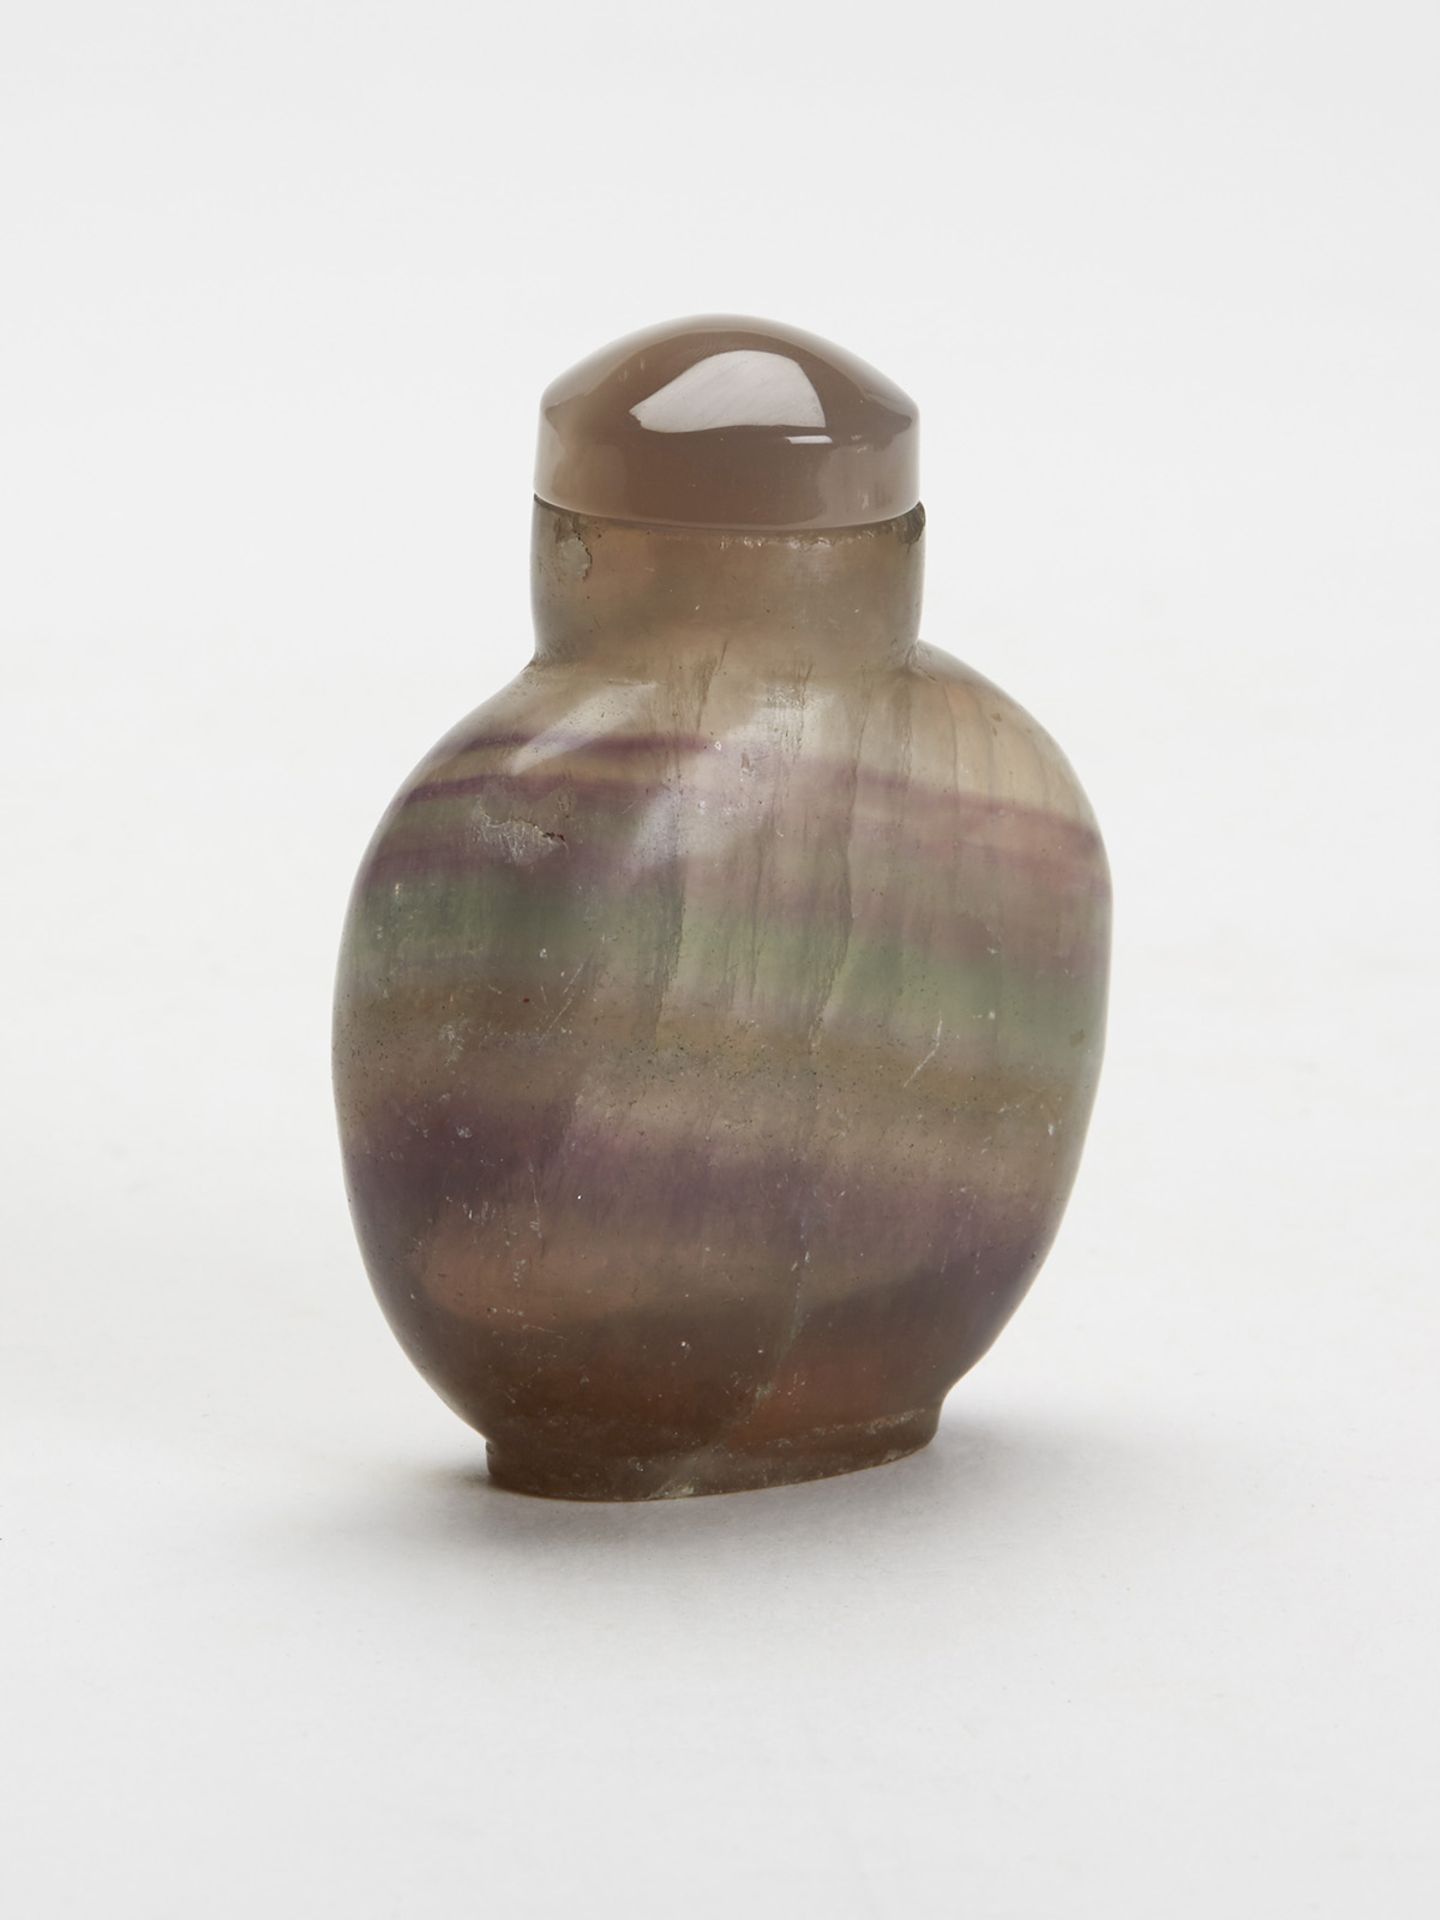 Antique Chinese Hardstone Snuff Bottle 18Th C. - Image 4 of 7